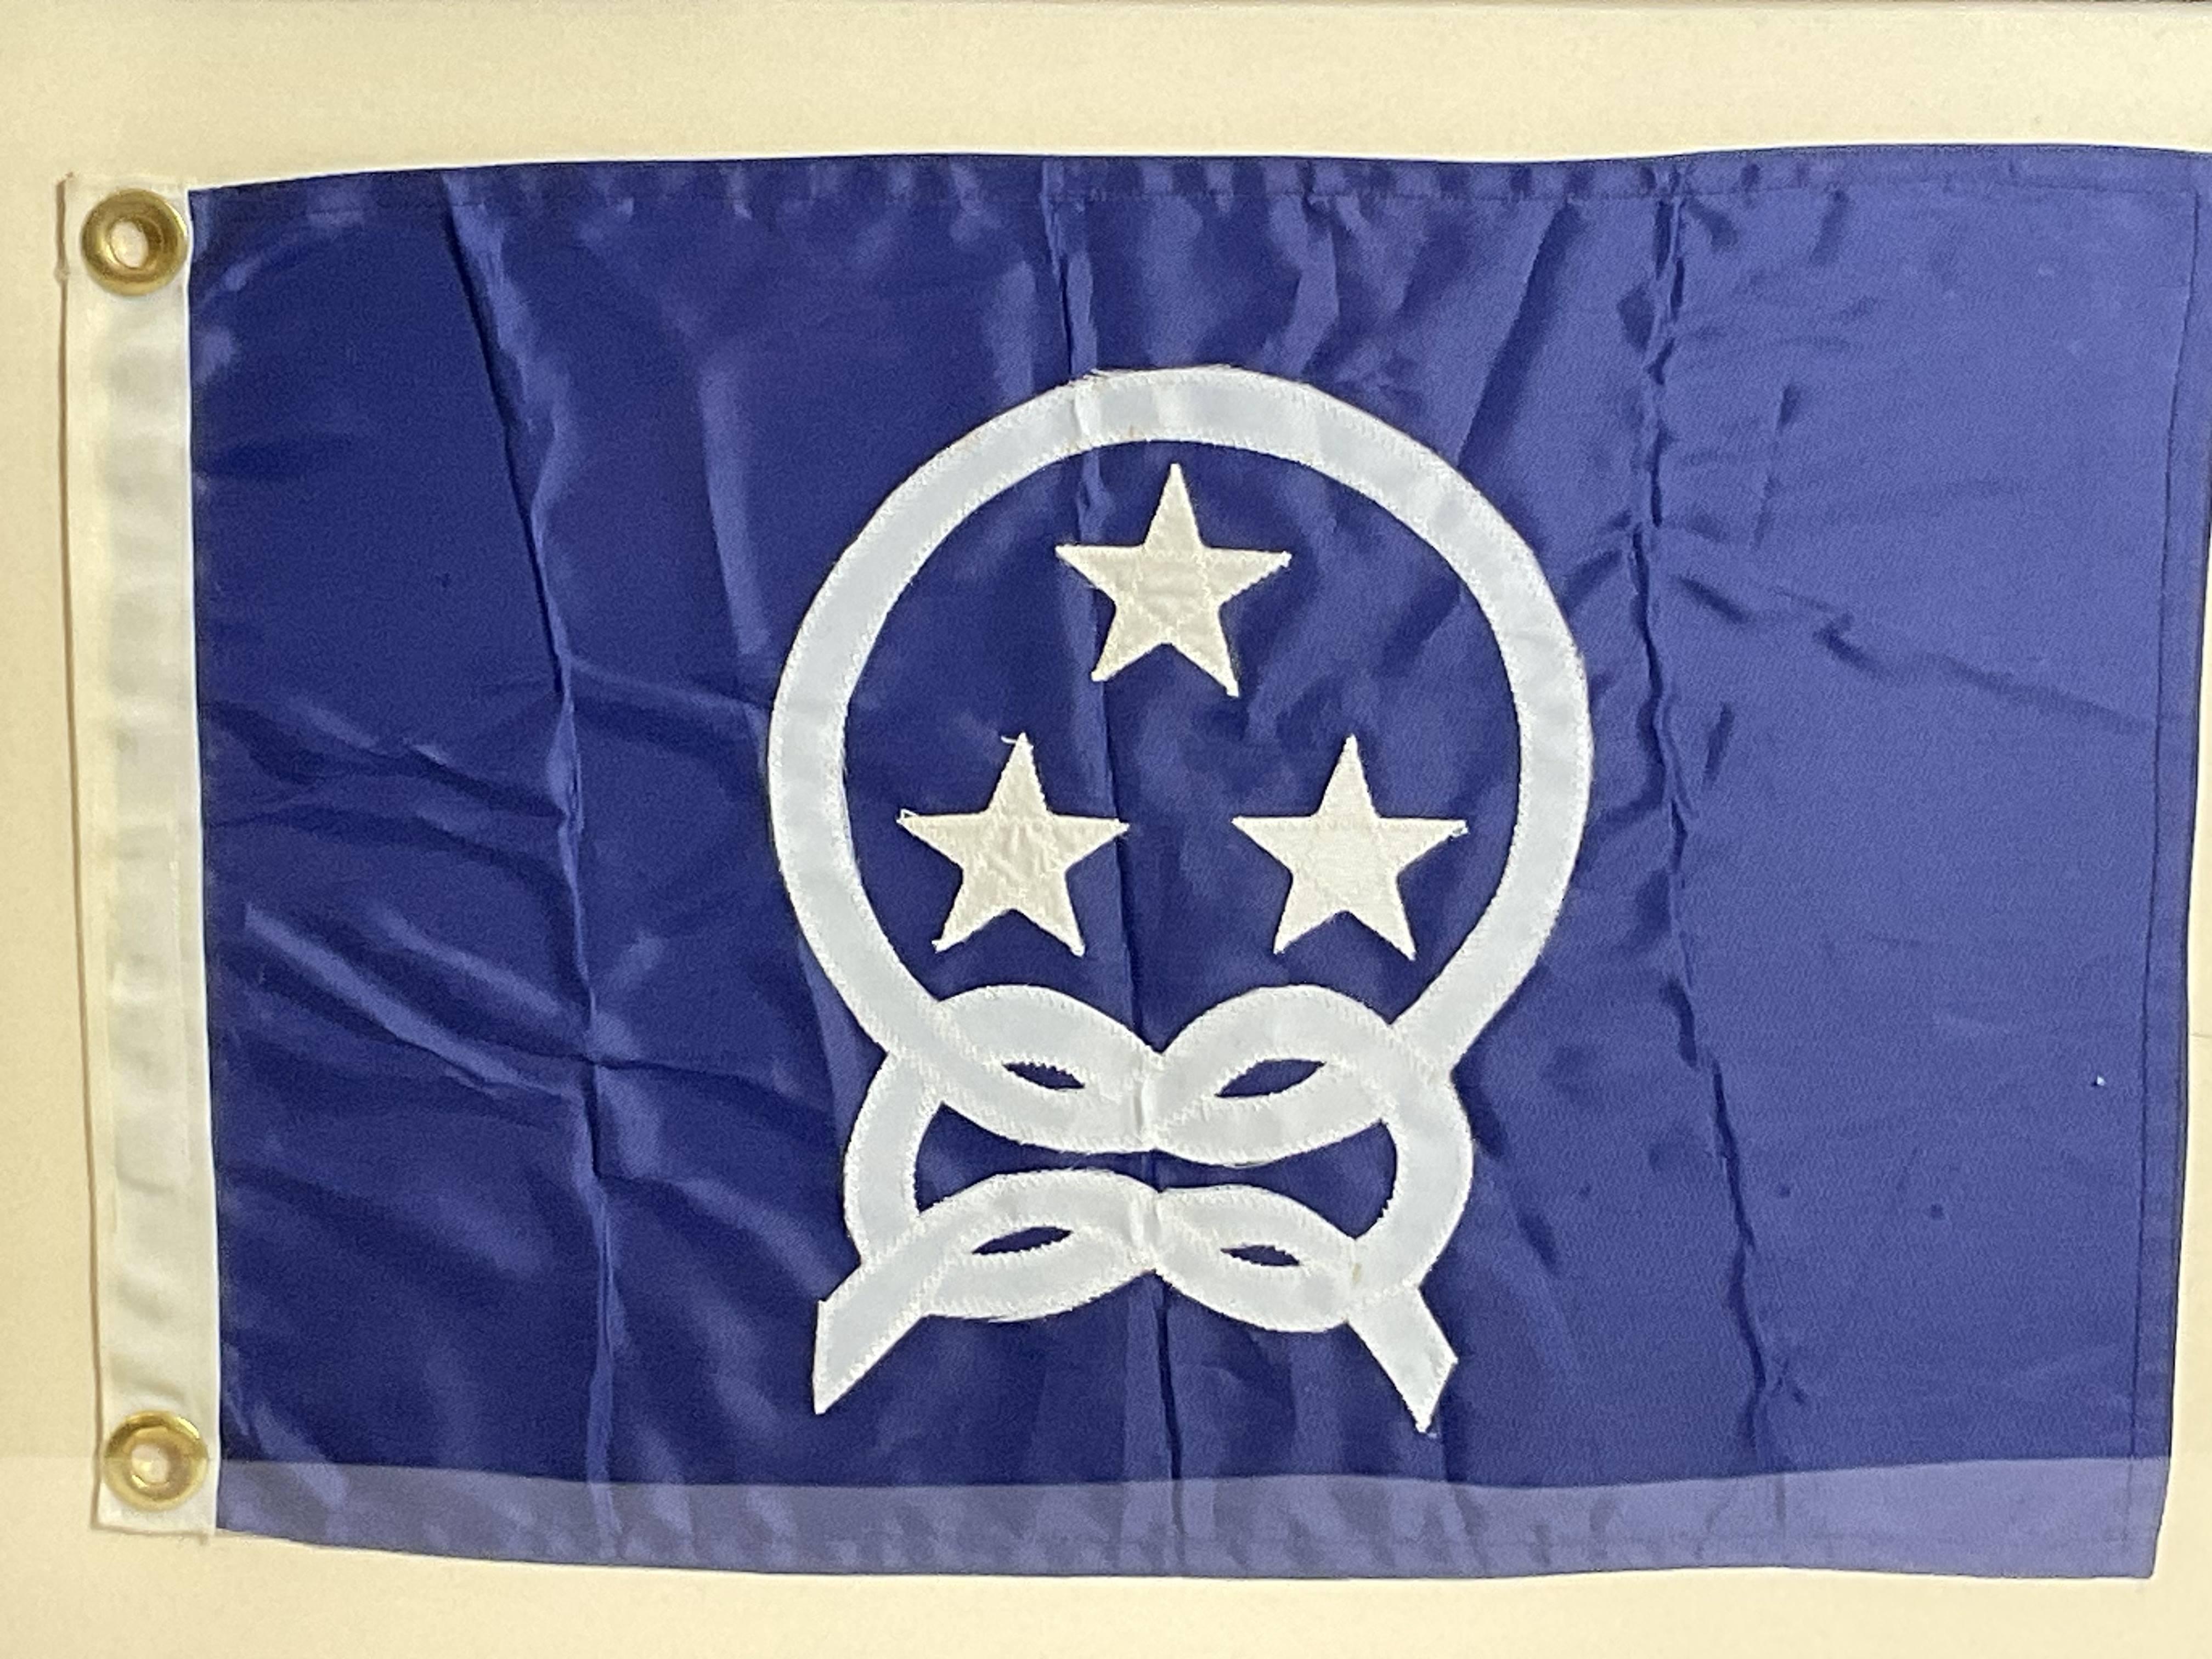 Yacht Club Commodores Flagge im Zustand „Gut“ im Angebot in Norwell, MA